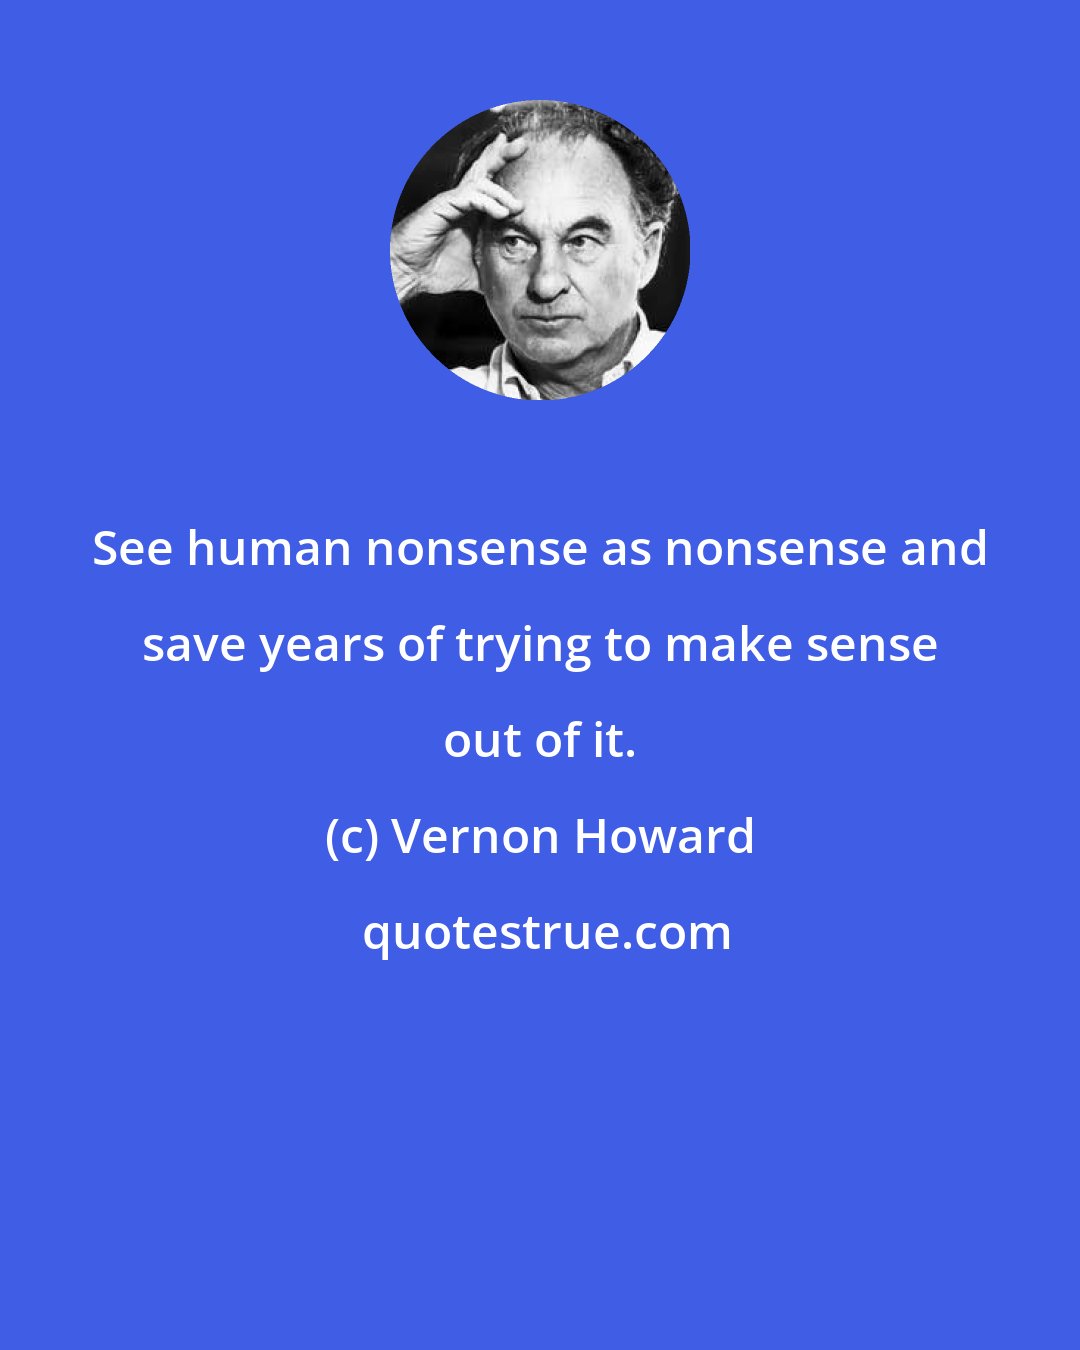 Vernon Howard: See human nonsense as nonsense and save years of trying to make sense out of it.